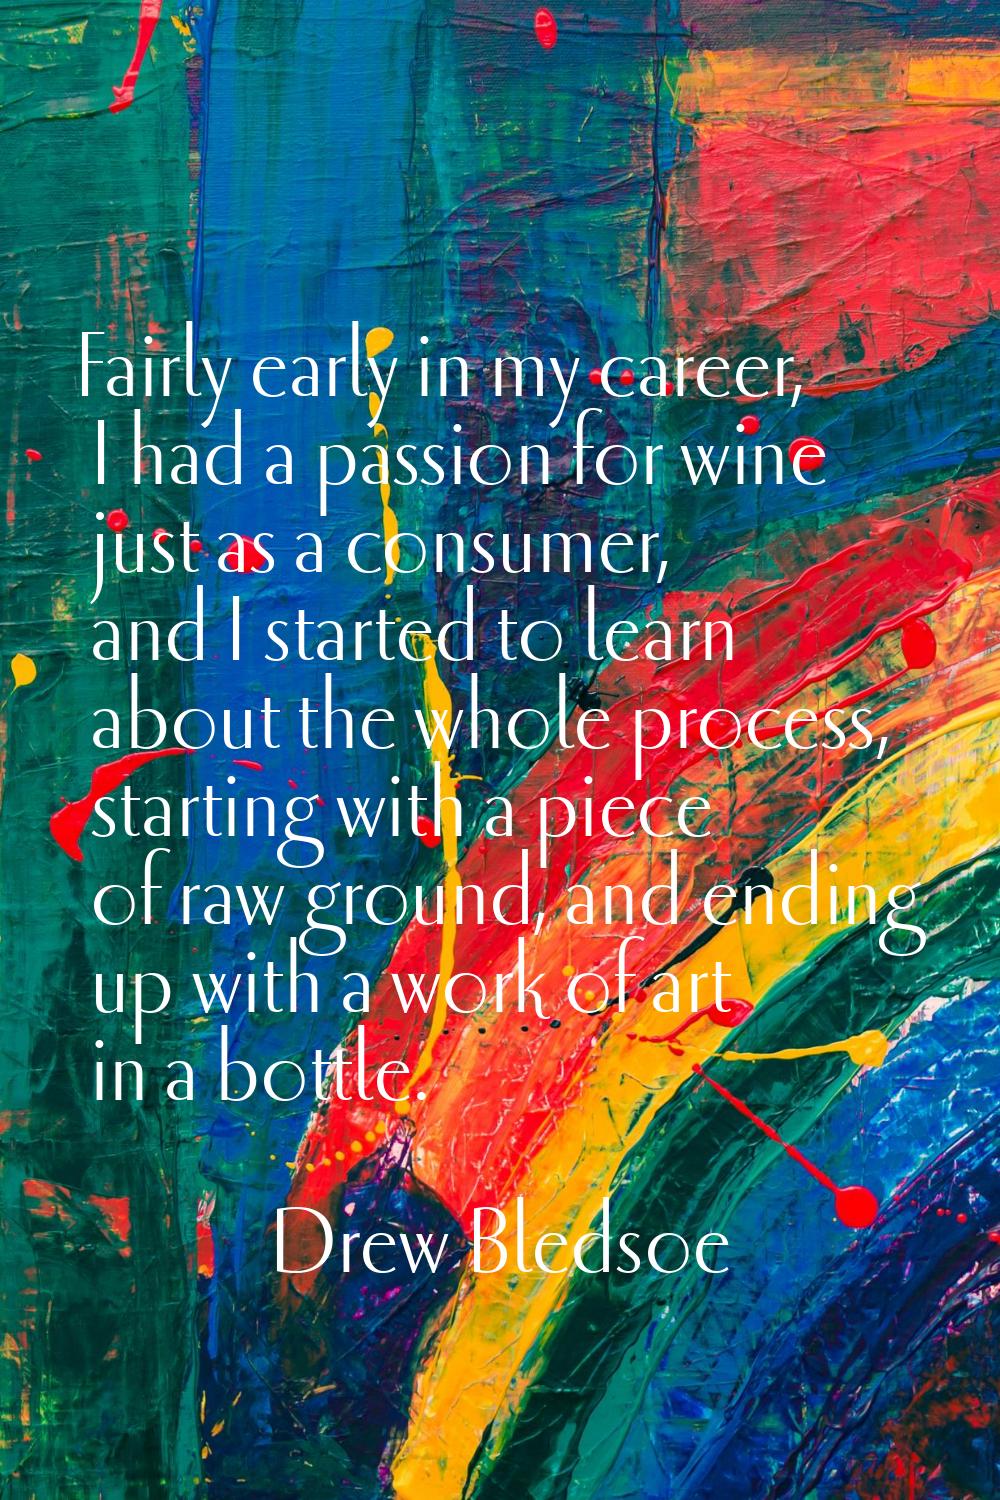 Fairly early in my career, I had a passion for wine just as a consumer, and I started to learn abou